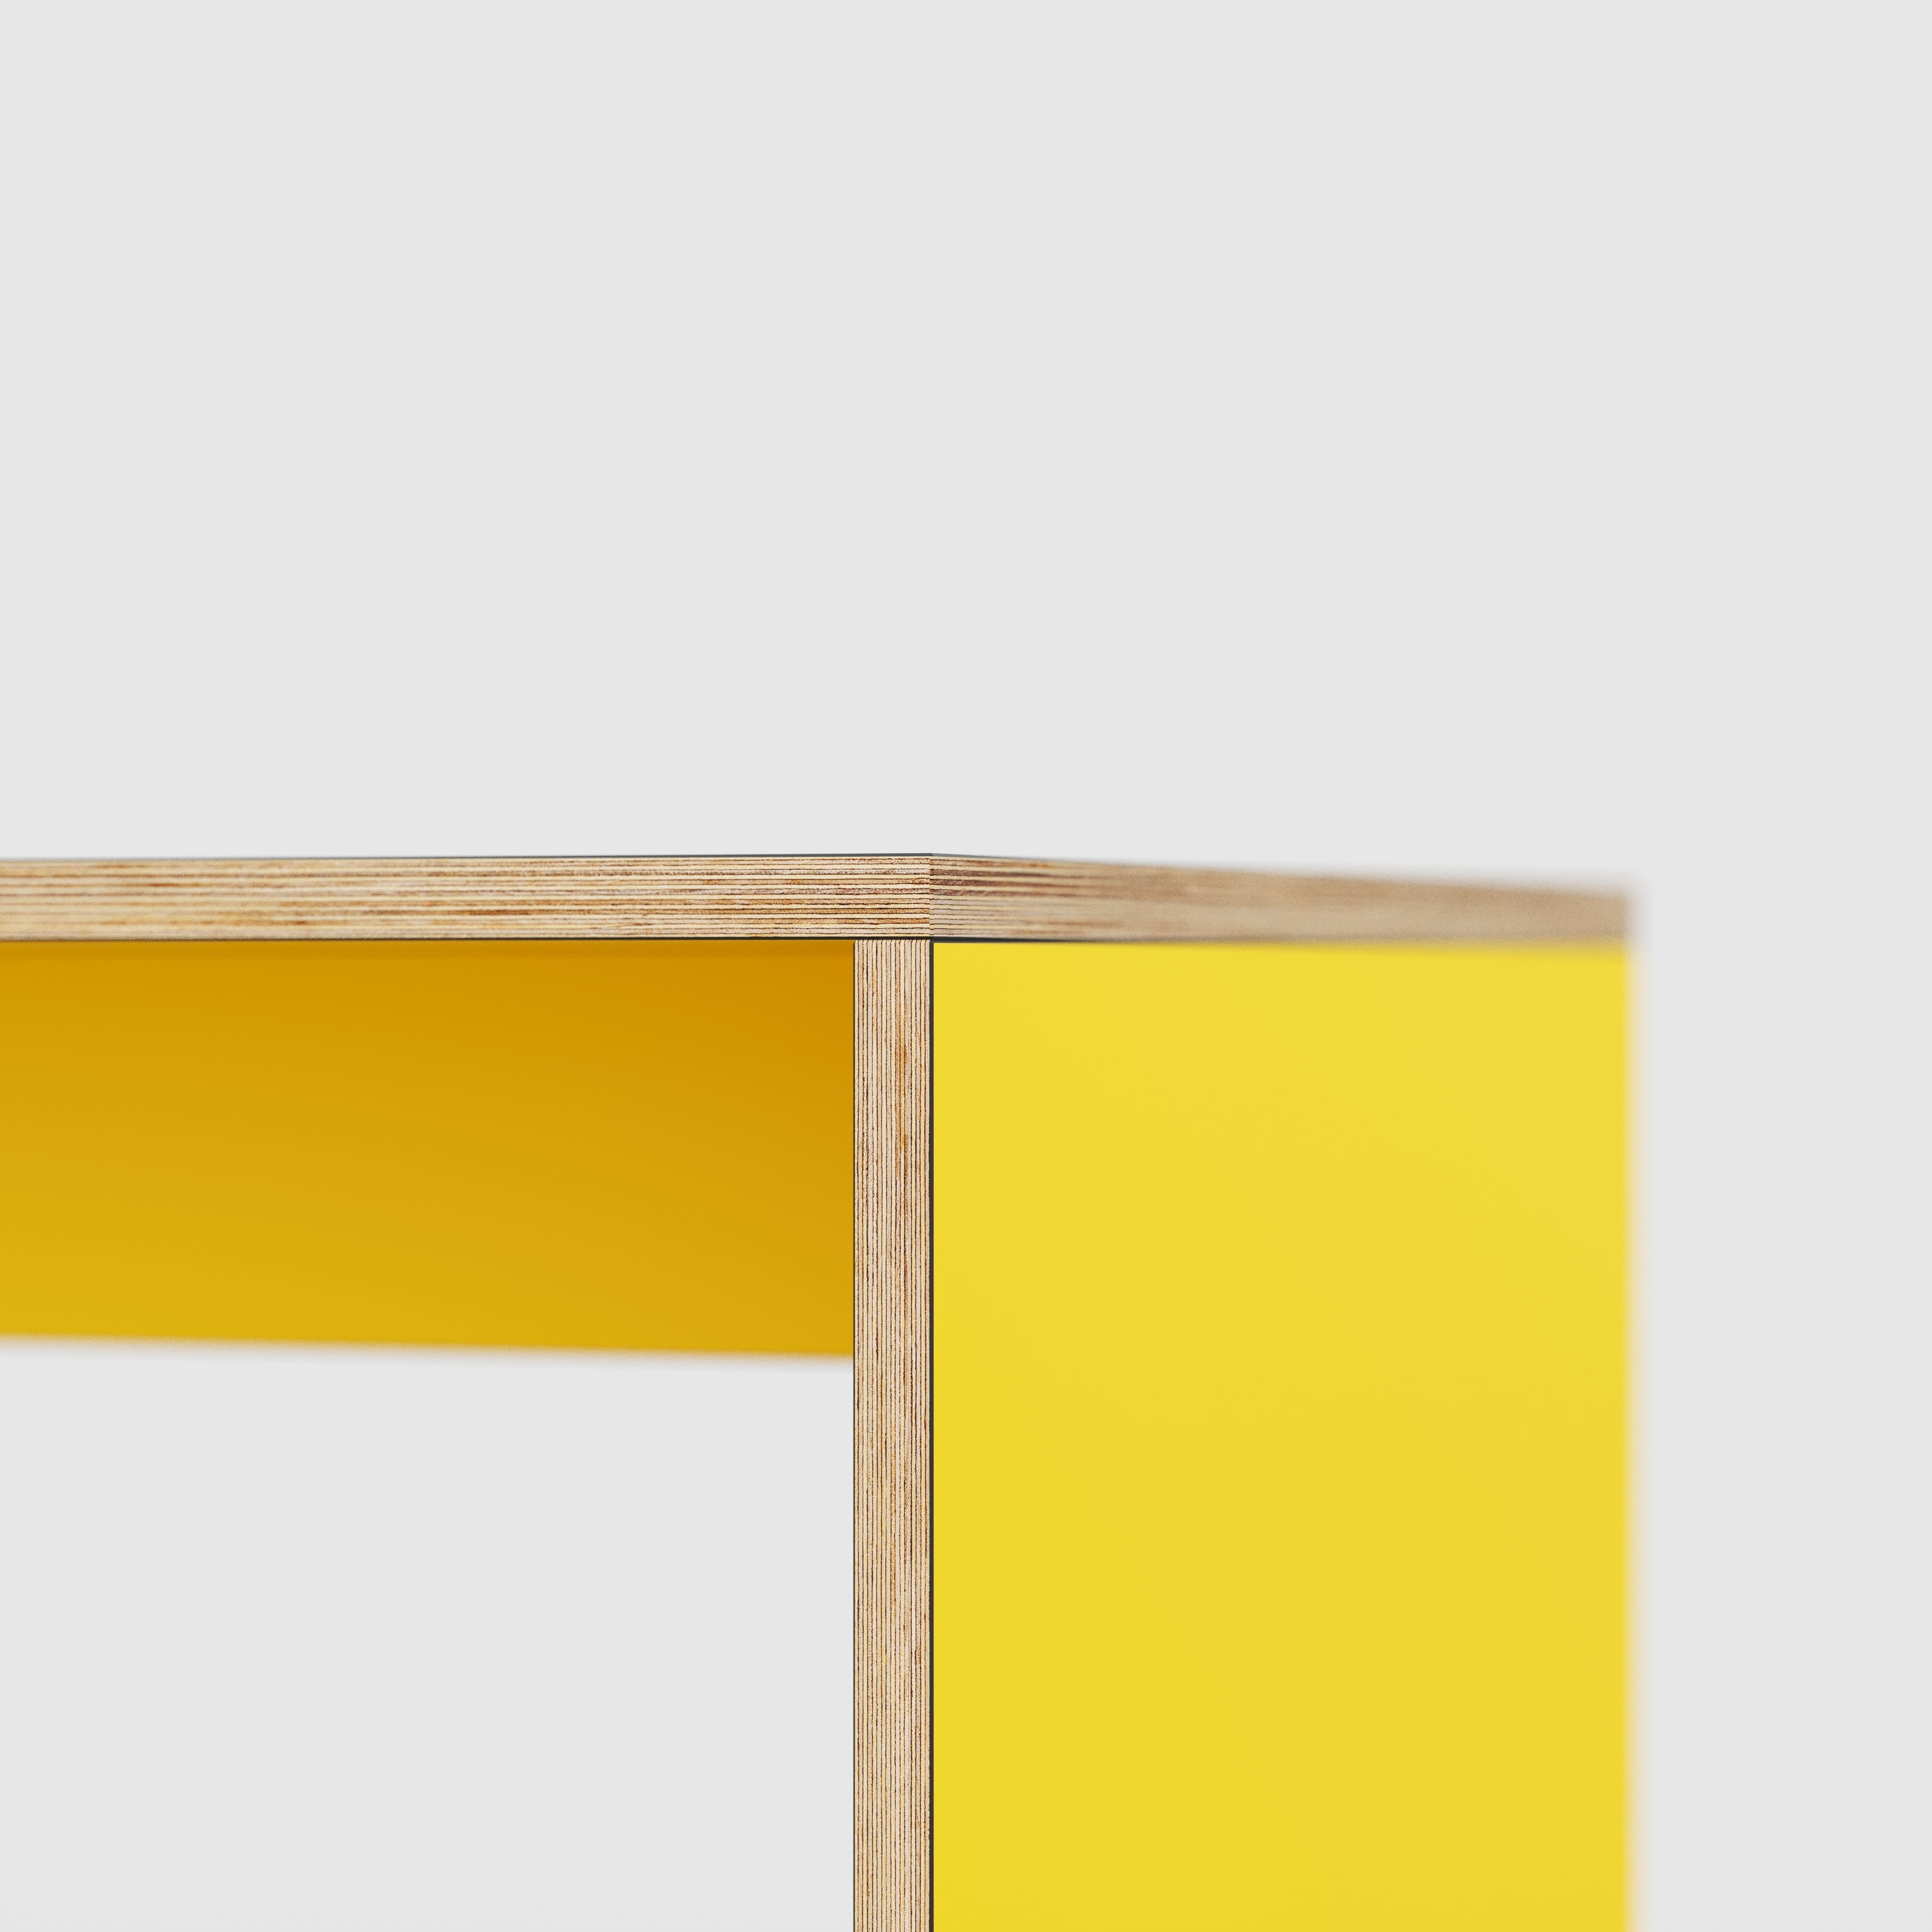 Table with Solid Sides - Formica Chrome Yellow - 5600(w) x 1000(d) x 750(h)